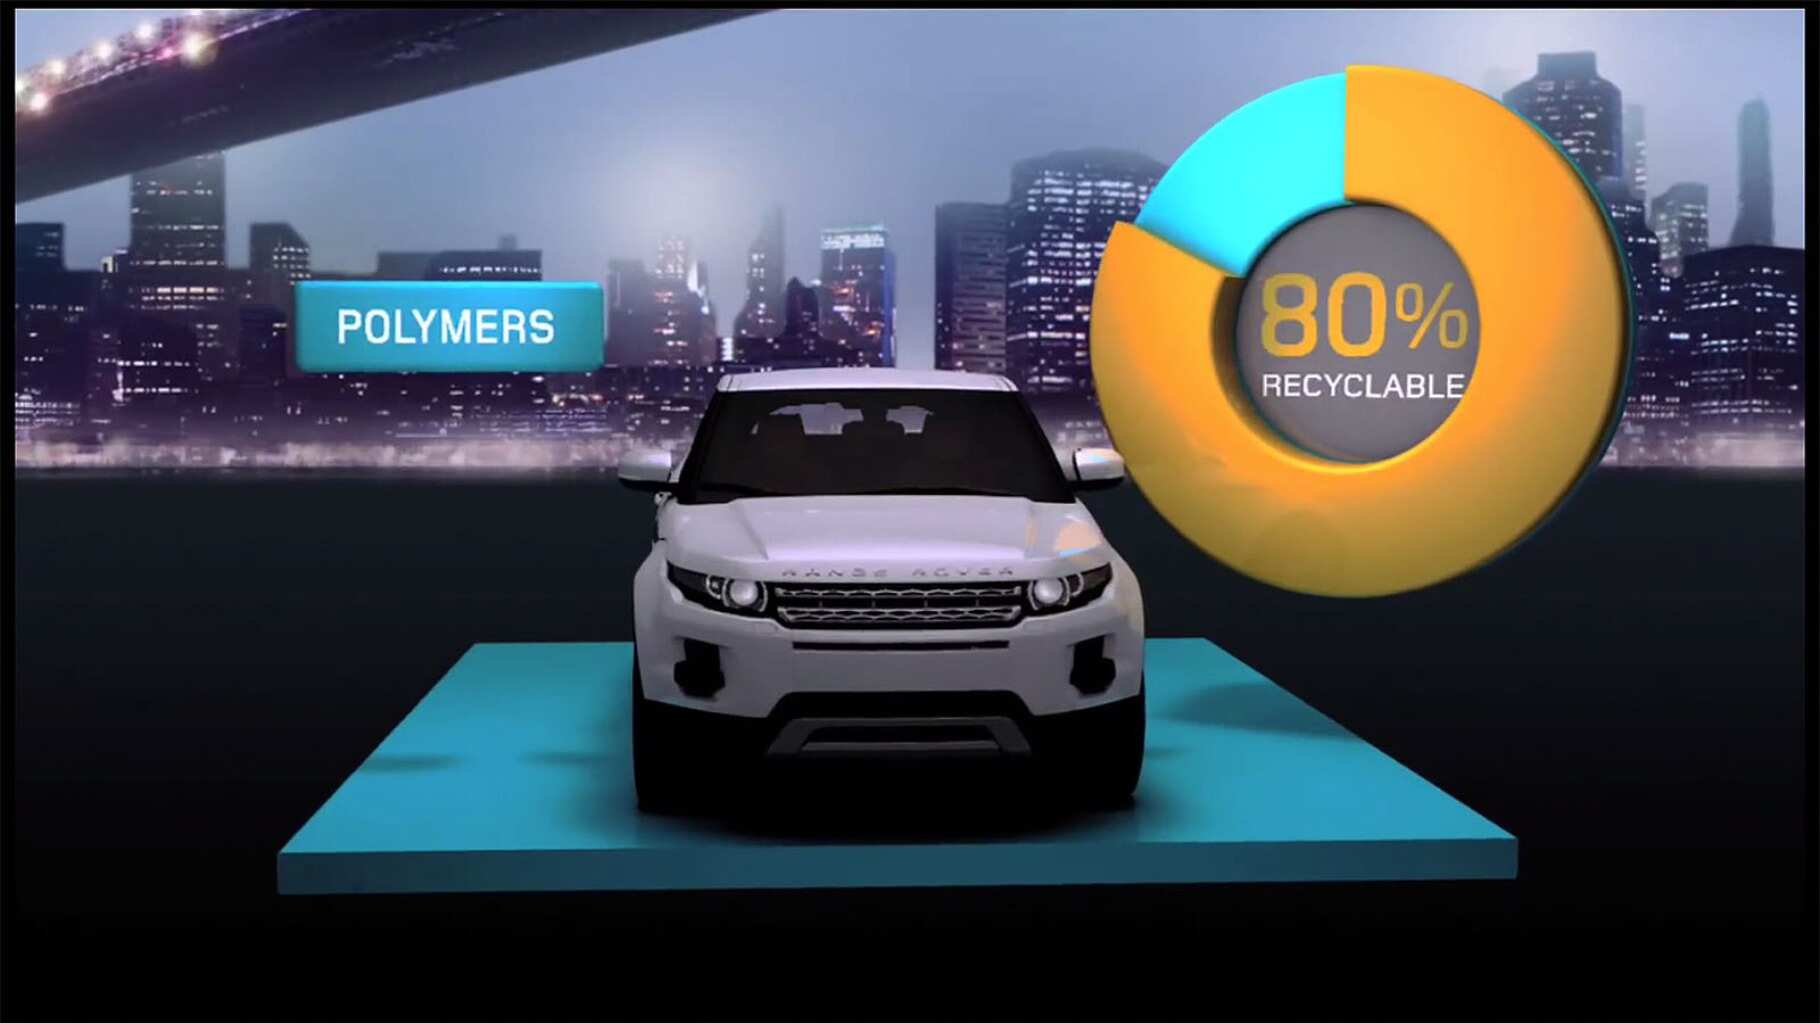 The Range Rover Evoque life cycle assessment